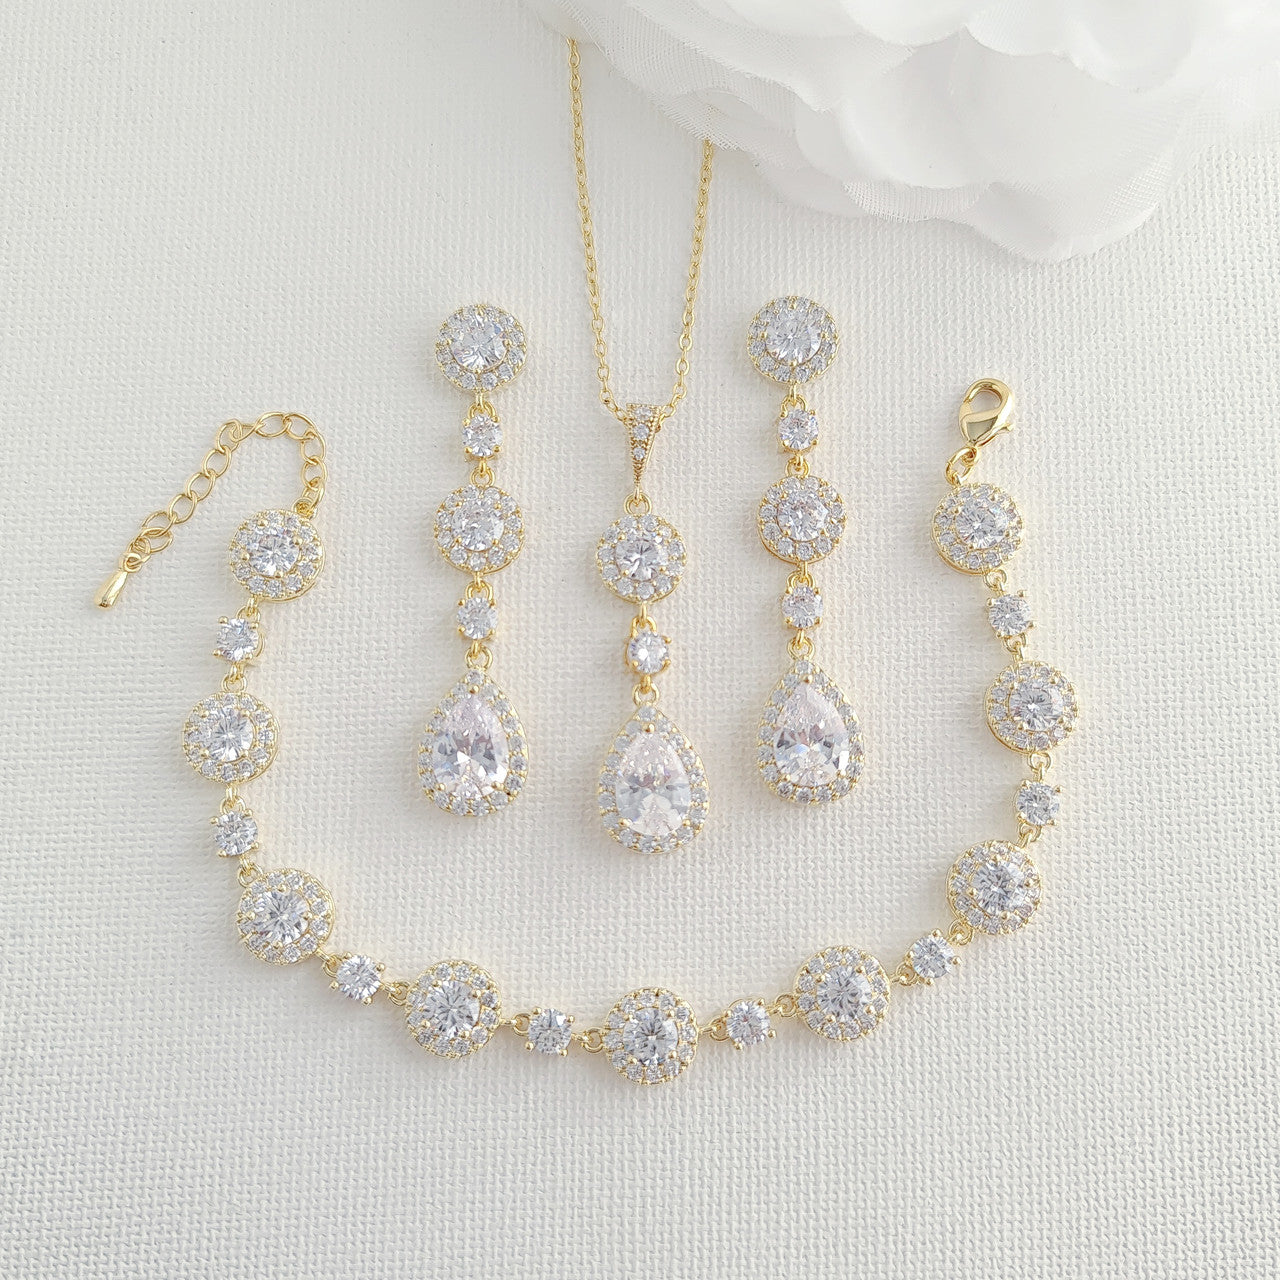 Jewellery Set of Gold Earrings Necklace Bracelet for Your Wedding Day-Reagan